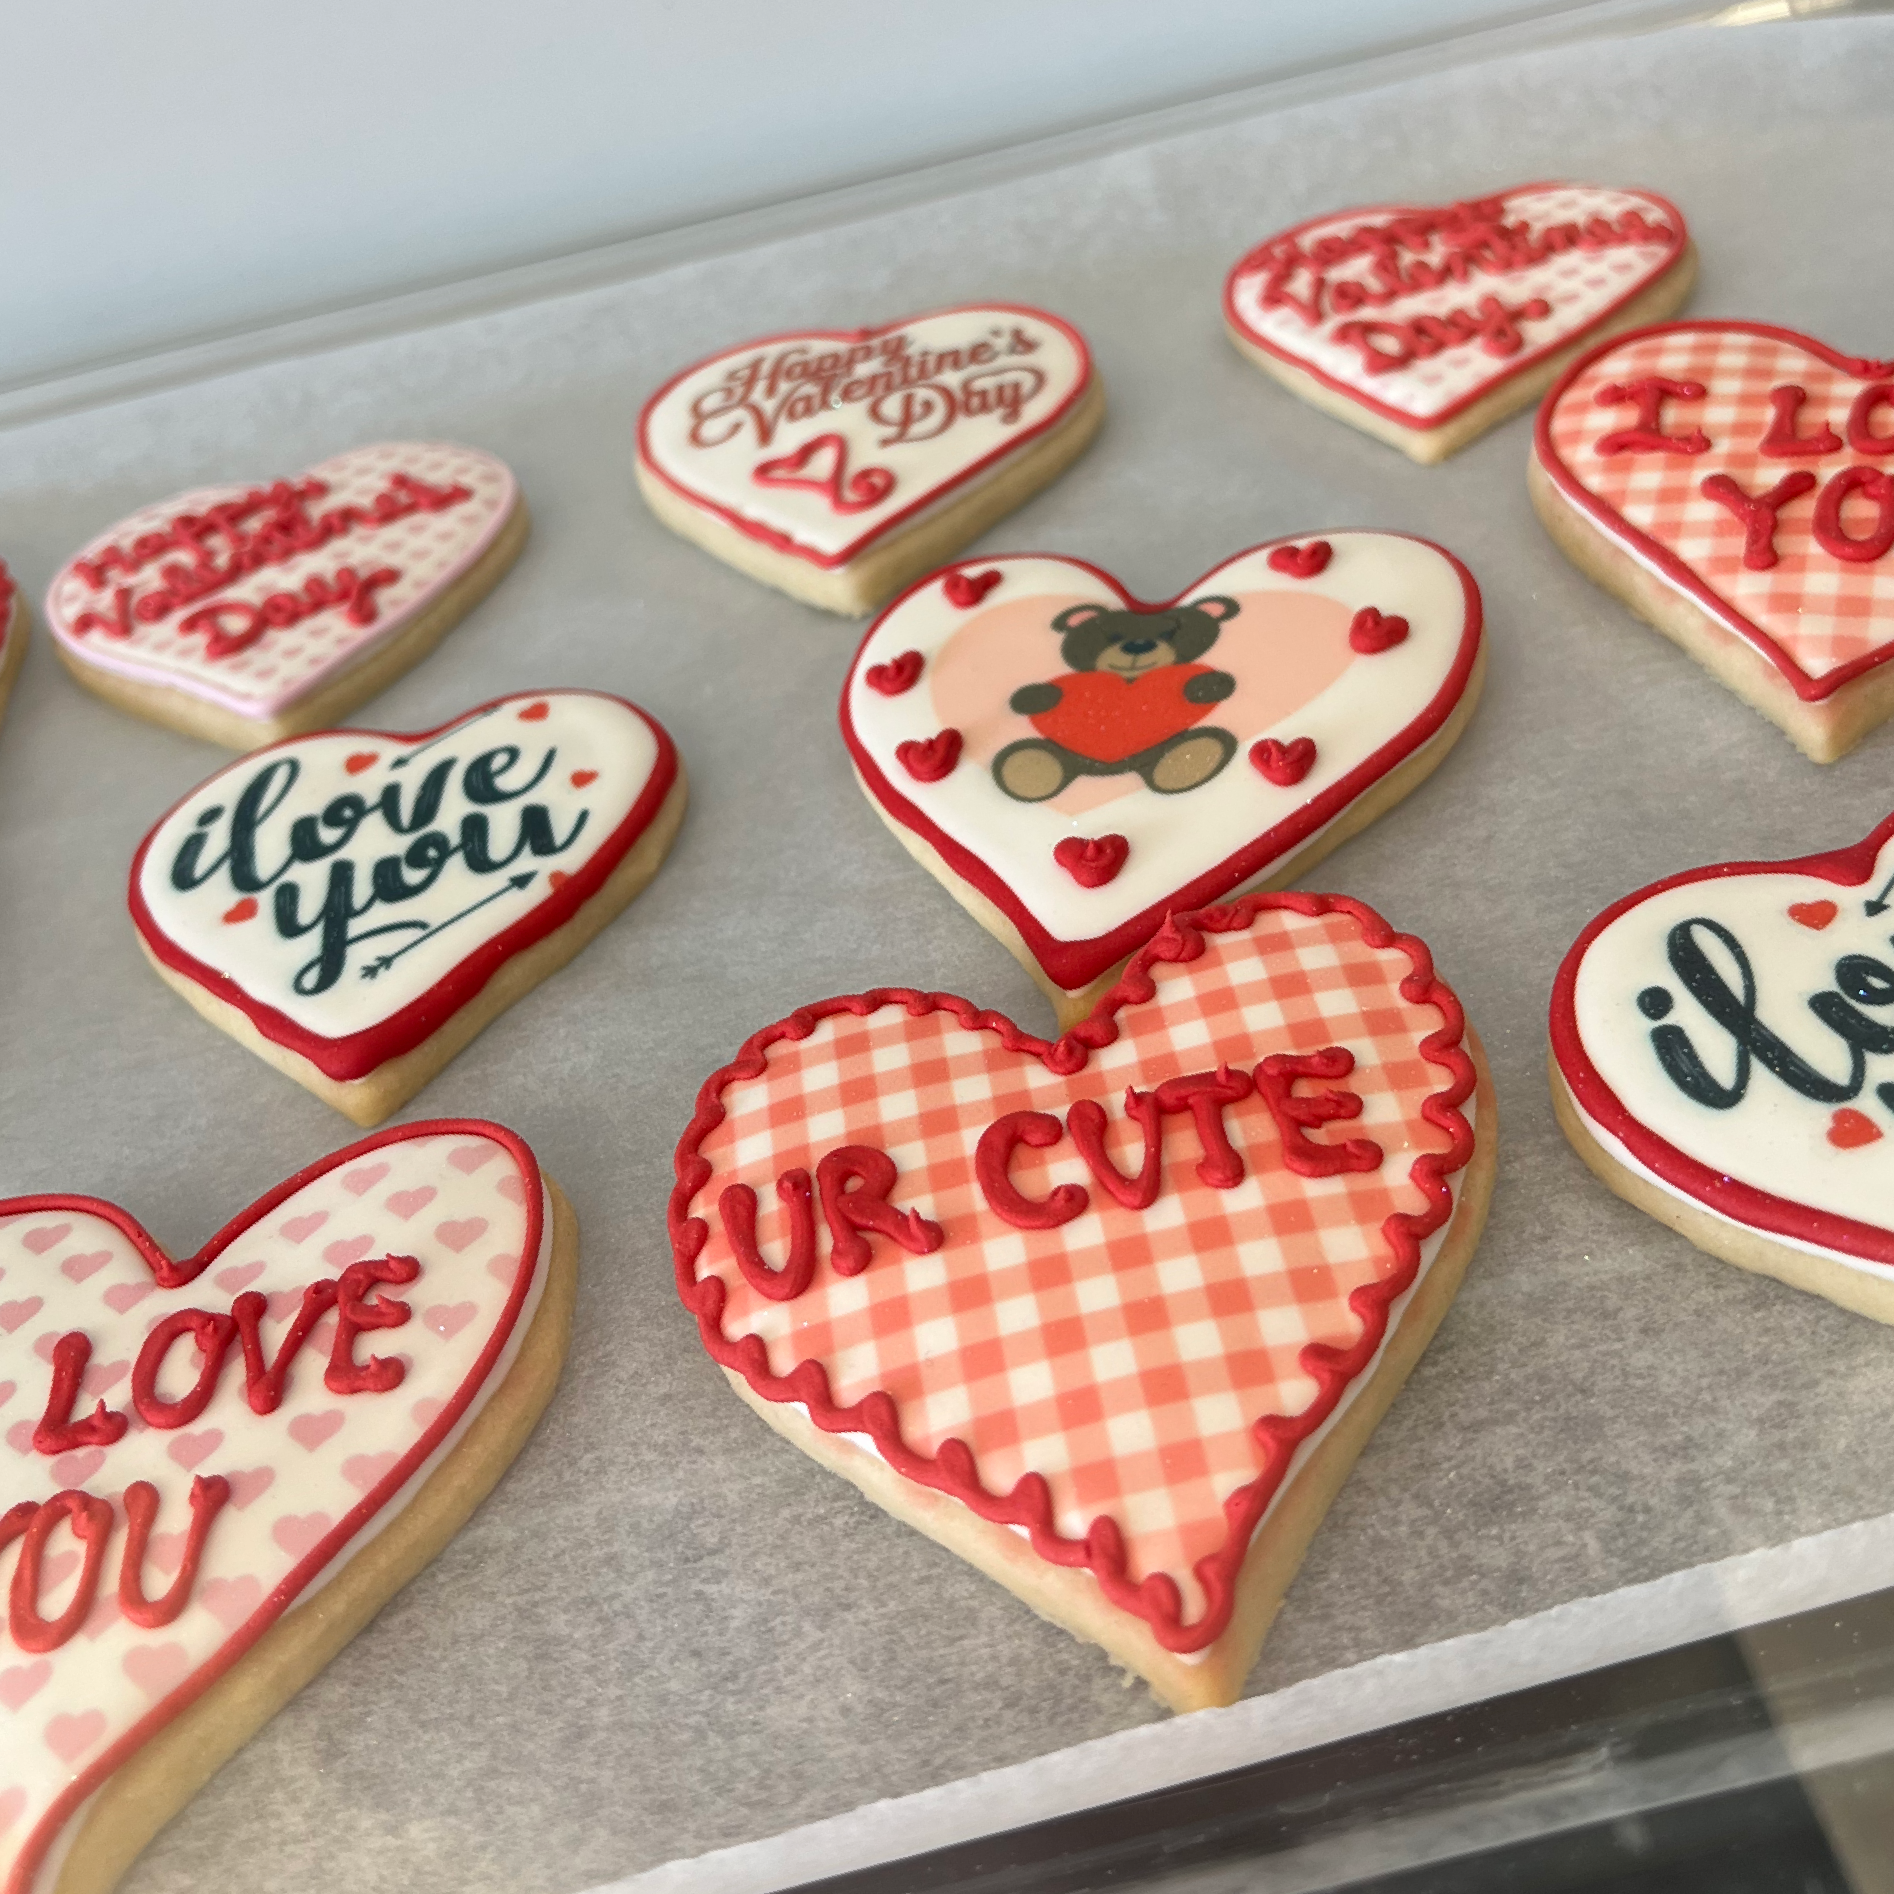 Heart shaped cookies with royal icing and valentine messages